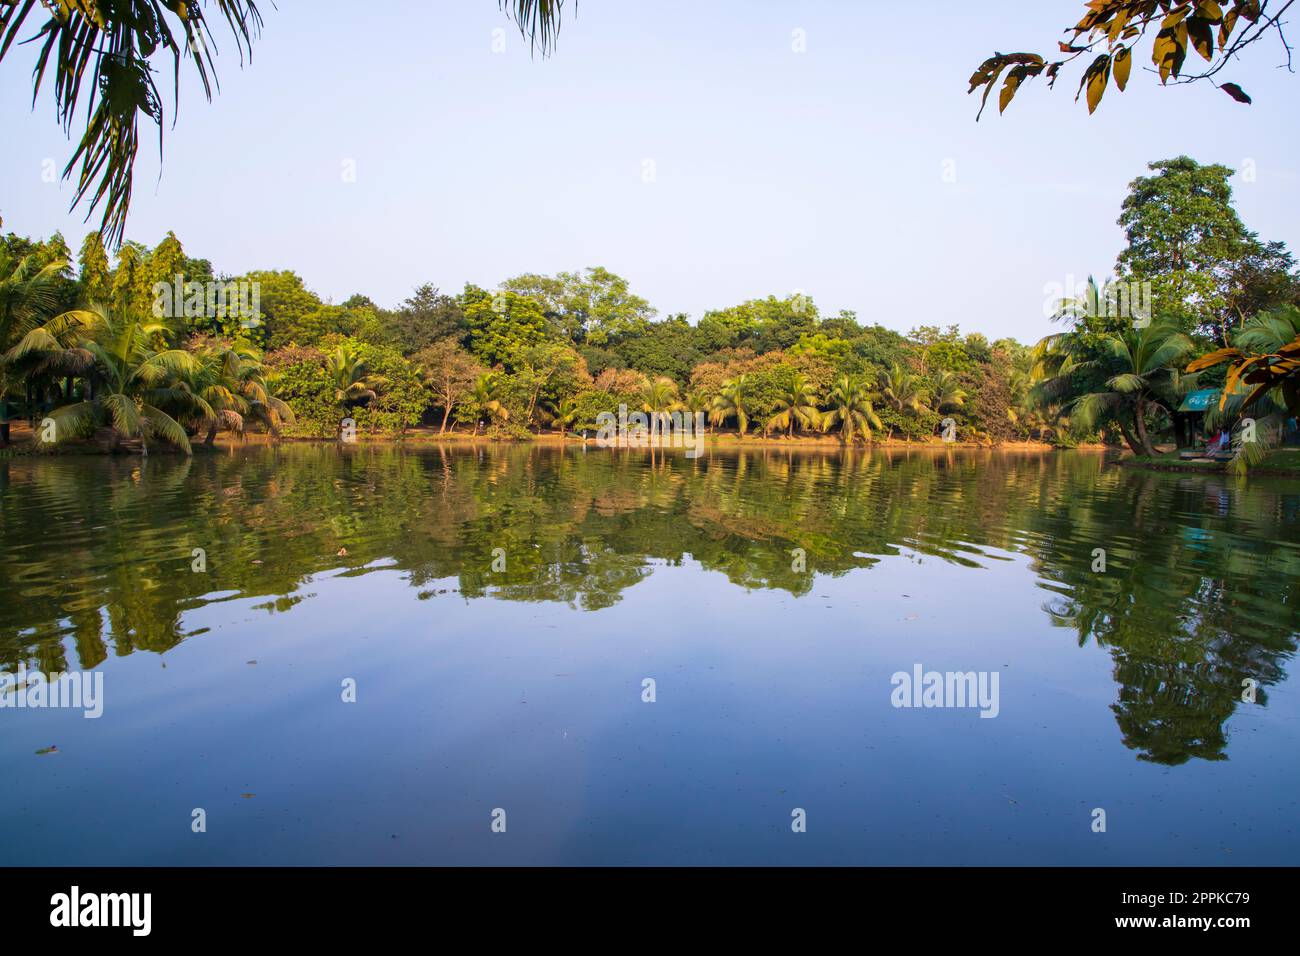 Natural landscape view Reflection of trees in the lake water against blue sky Stock Photo